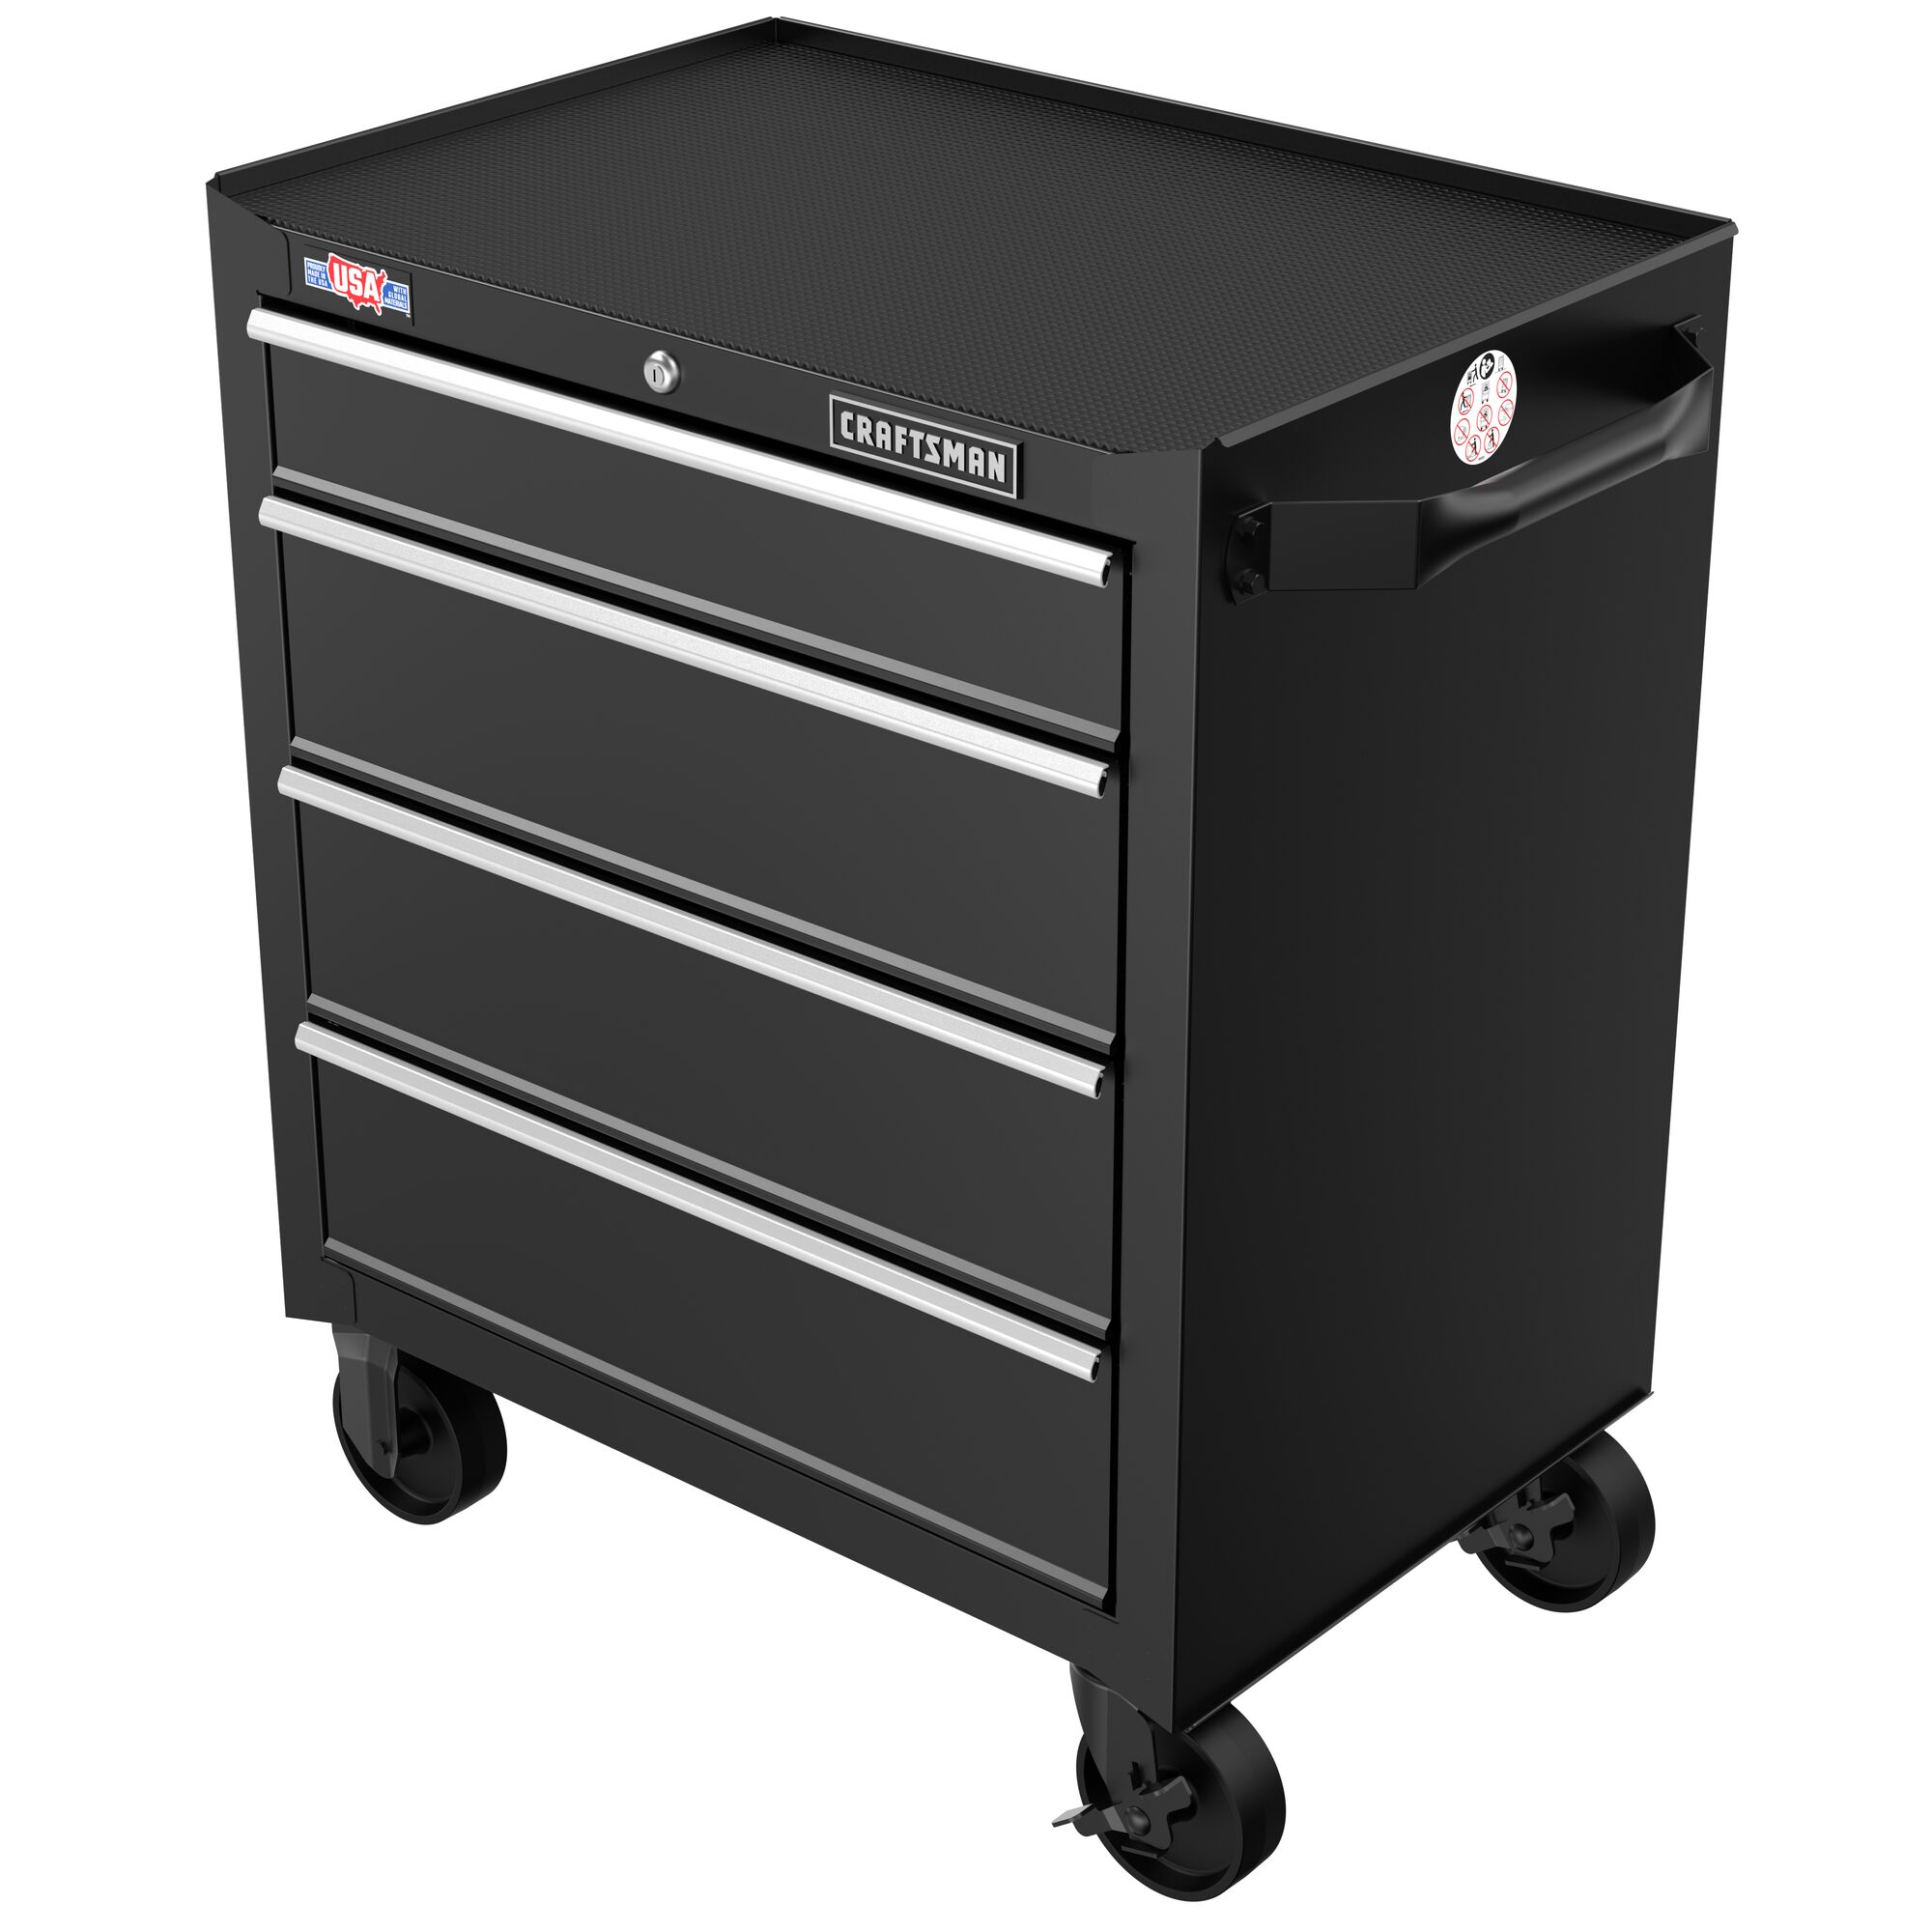 CRAFTSMAN 4-drawer cabinet highlighting recessed side handles feature